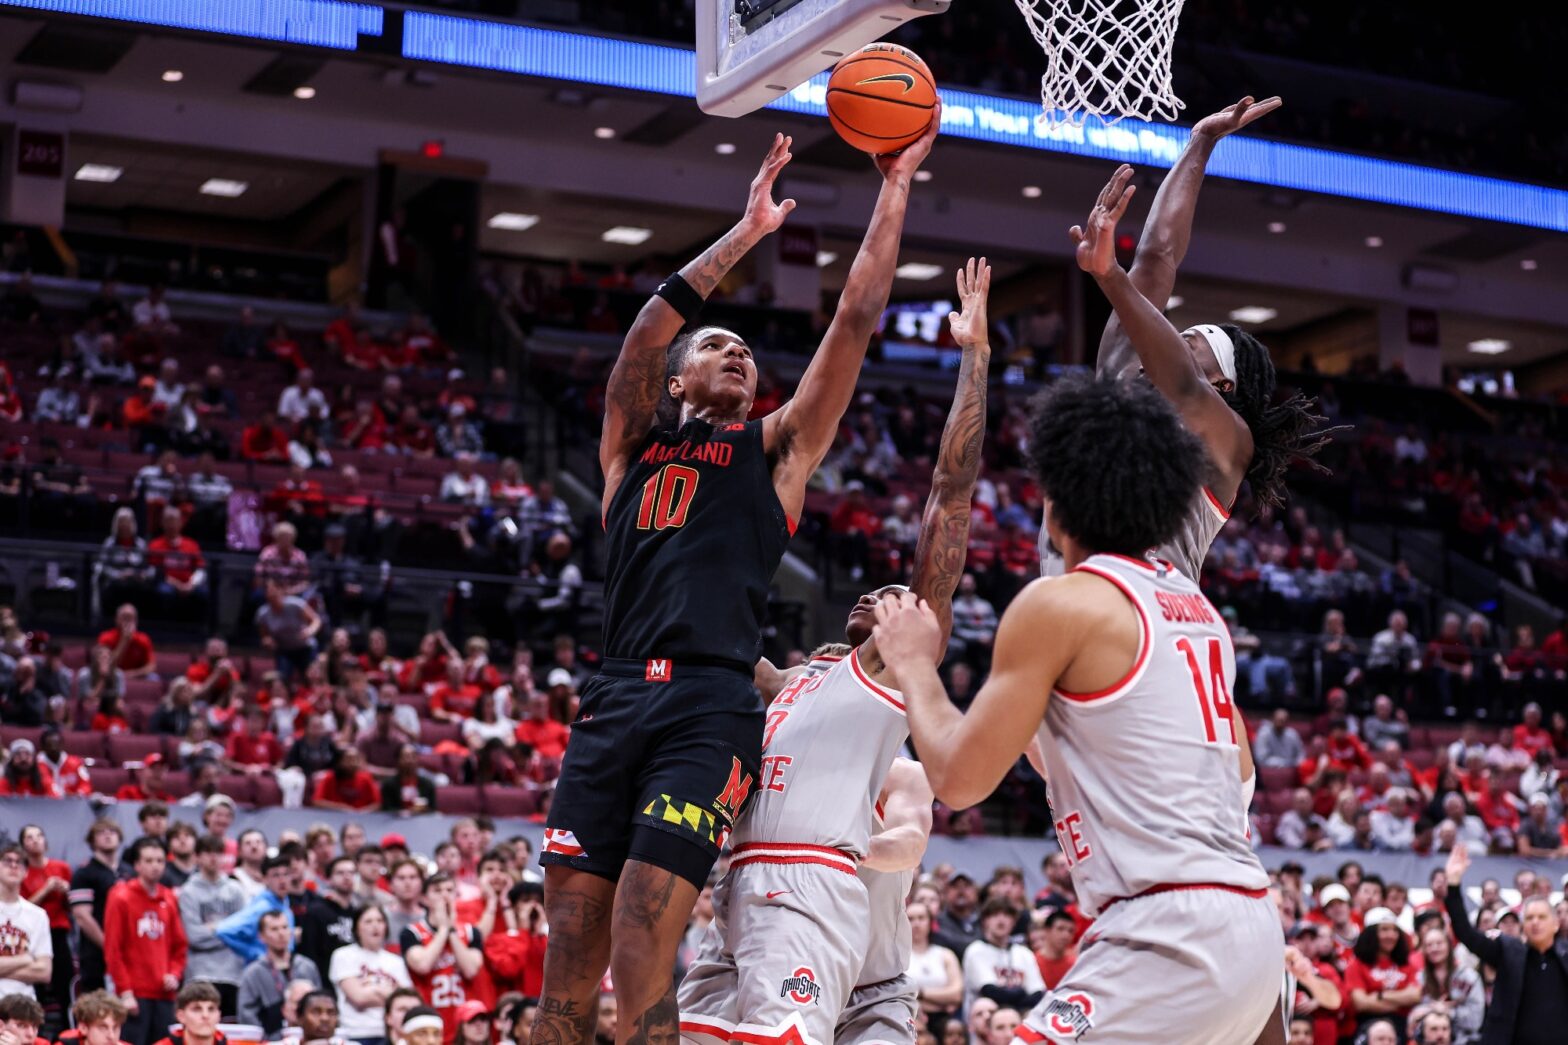 Maryland basketball forward Julian Reese attempts a layup against three Ohio State Buckeye defenders